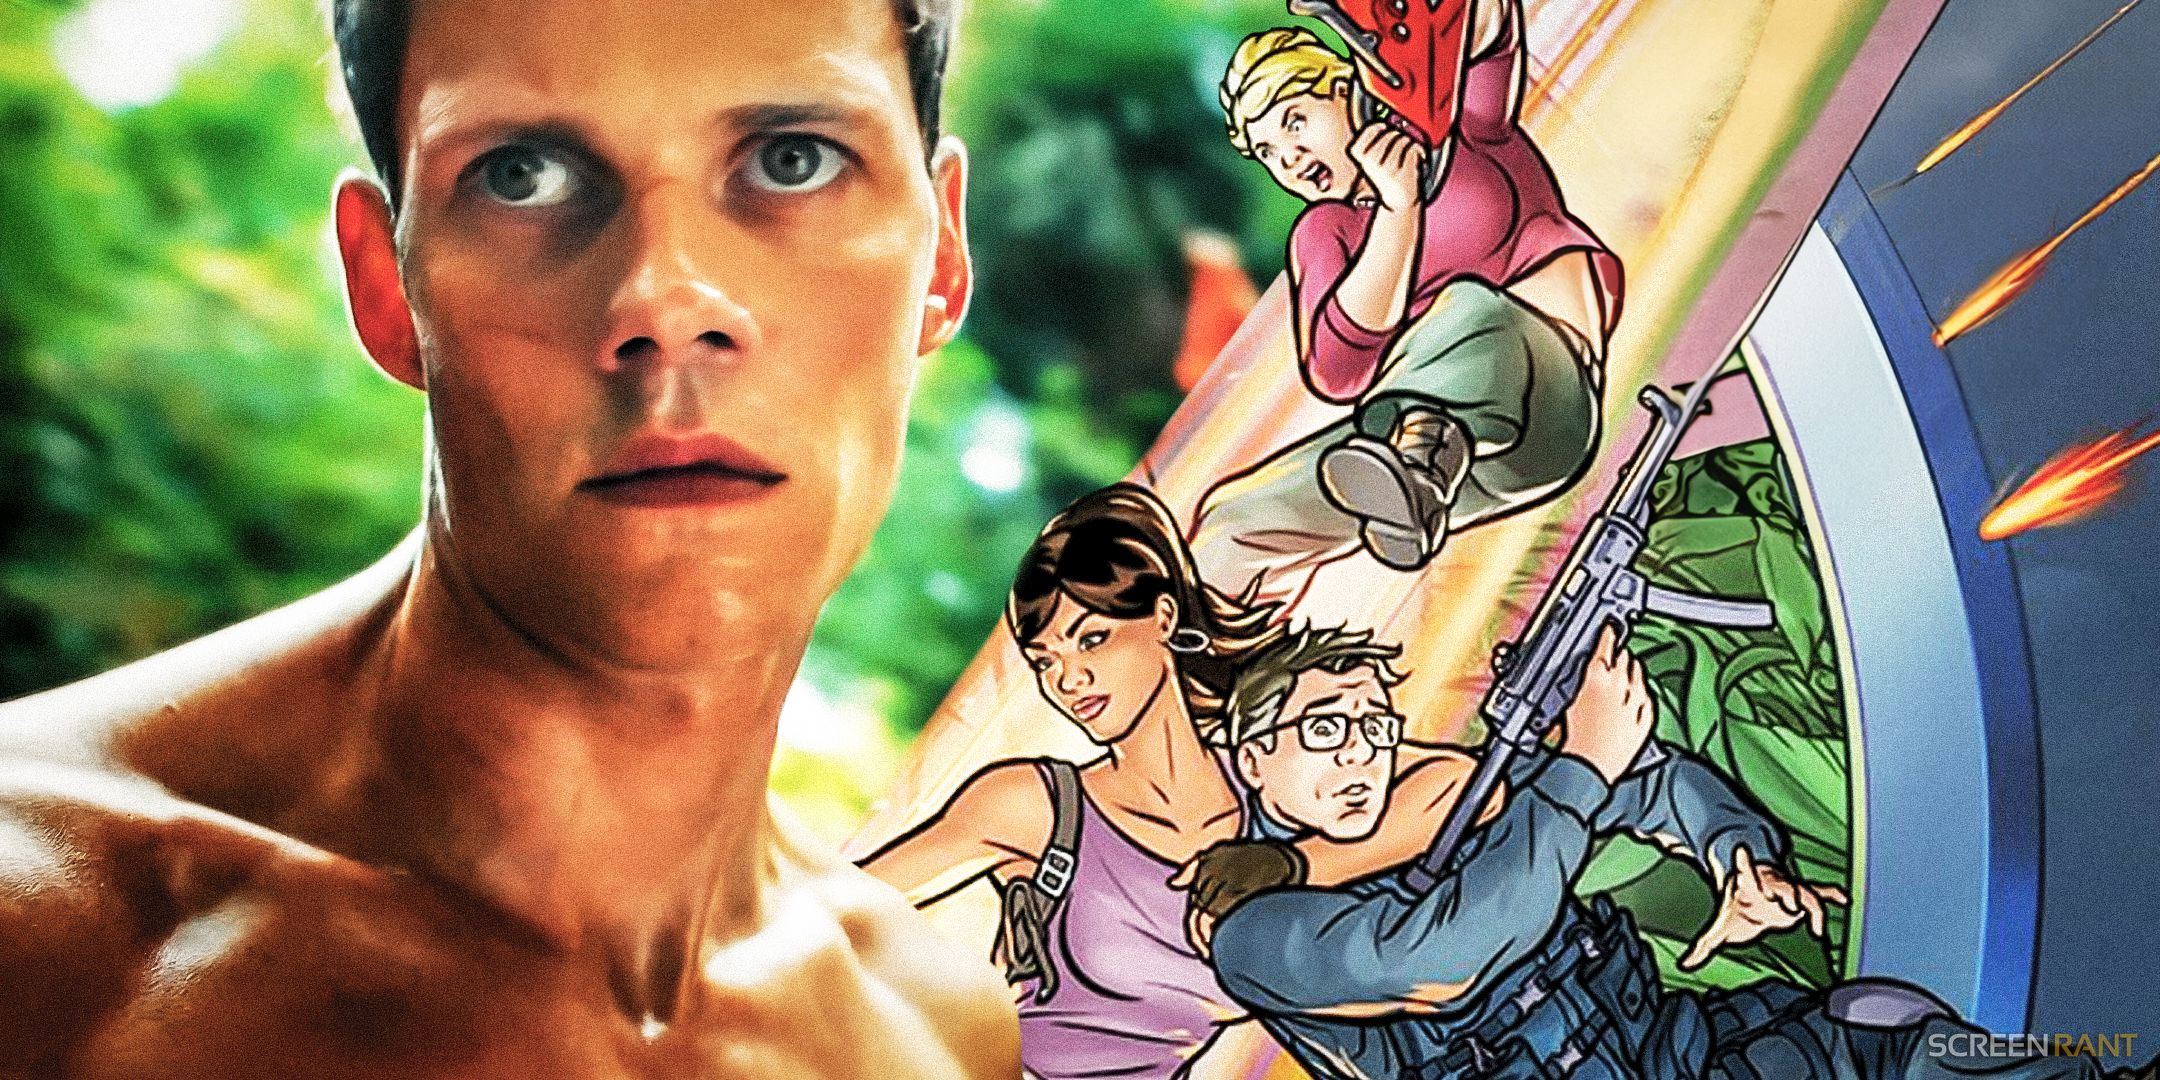 A shirtless Bill- karsgård in Boy Kills World and the cast of FX's Archer